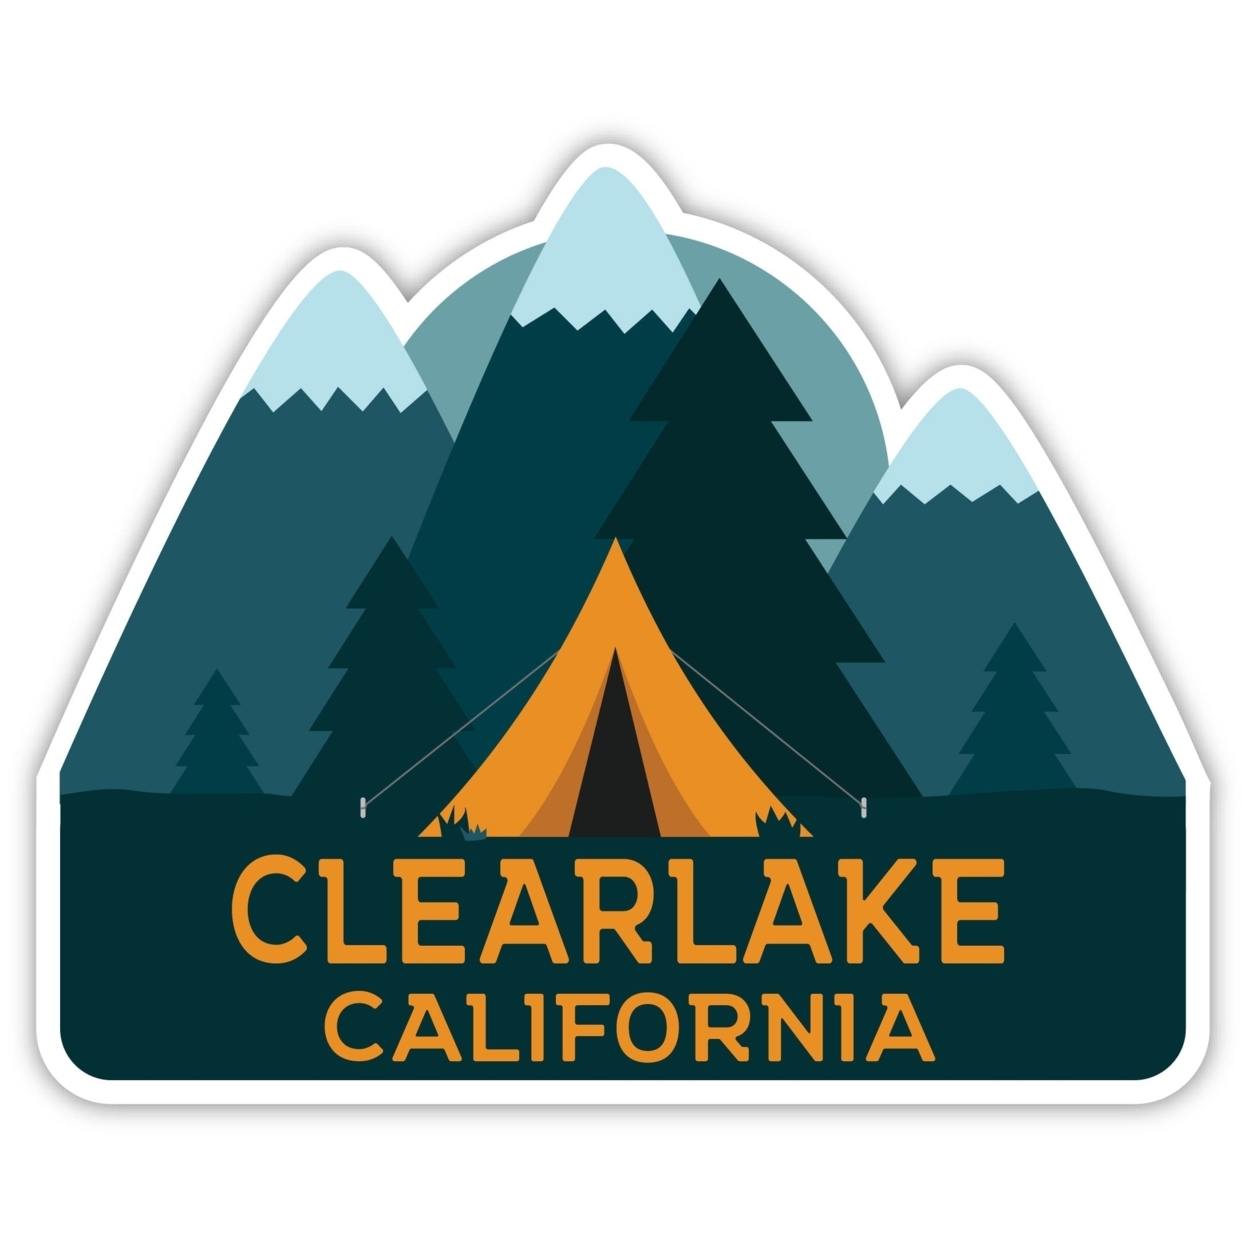 Clearlake California Souvenir Decorative Stickers (Choose Theme And Size) - 4-Pack, 4-Inch, Bear